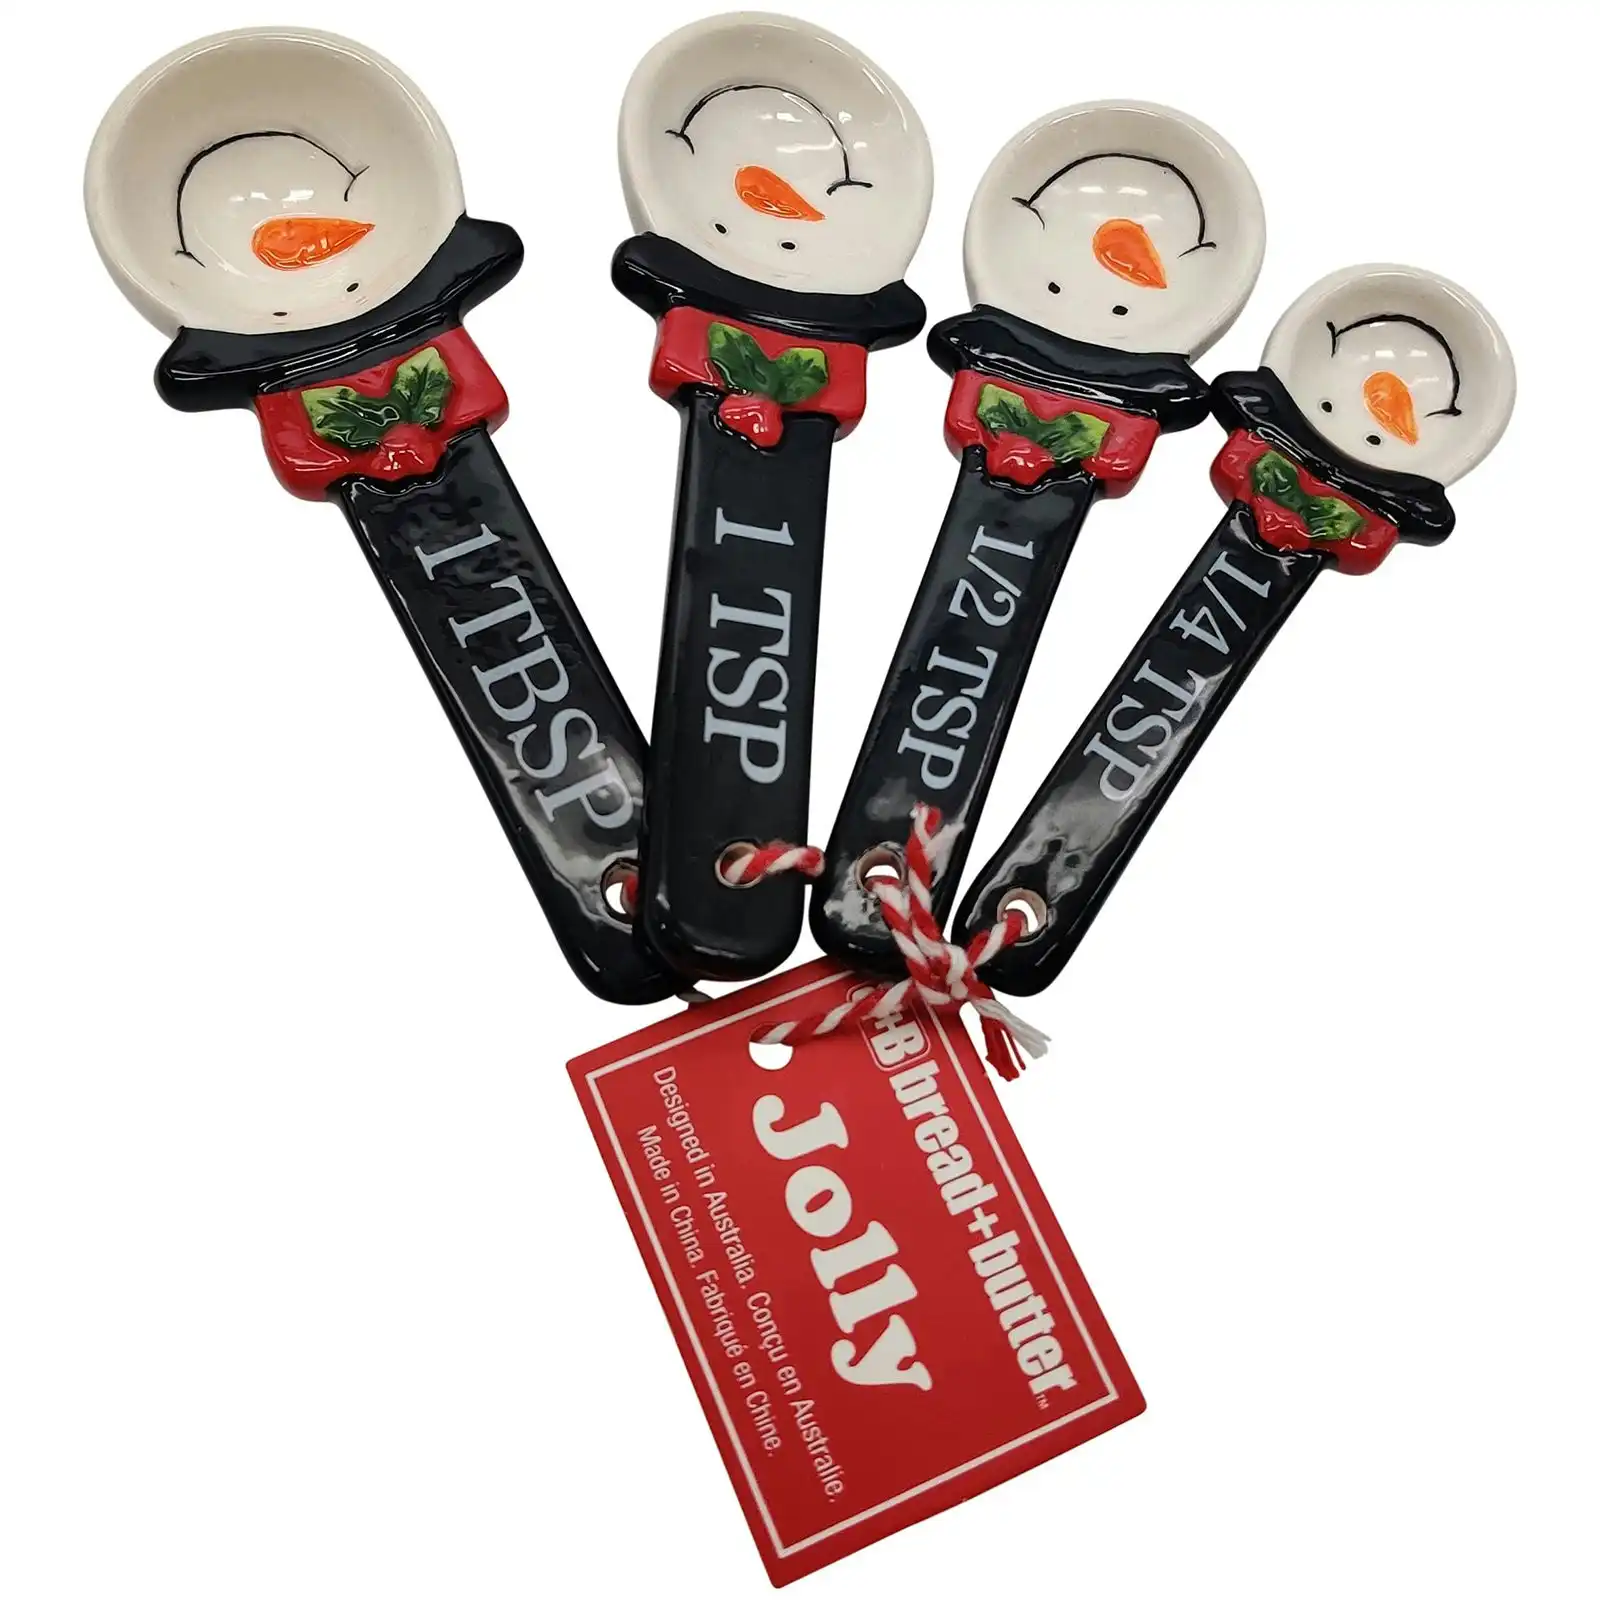 Bread and Butter Snowman Spoons - 4 Pack - Black / White